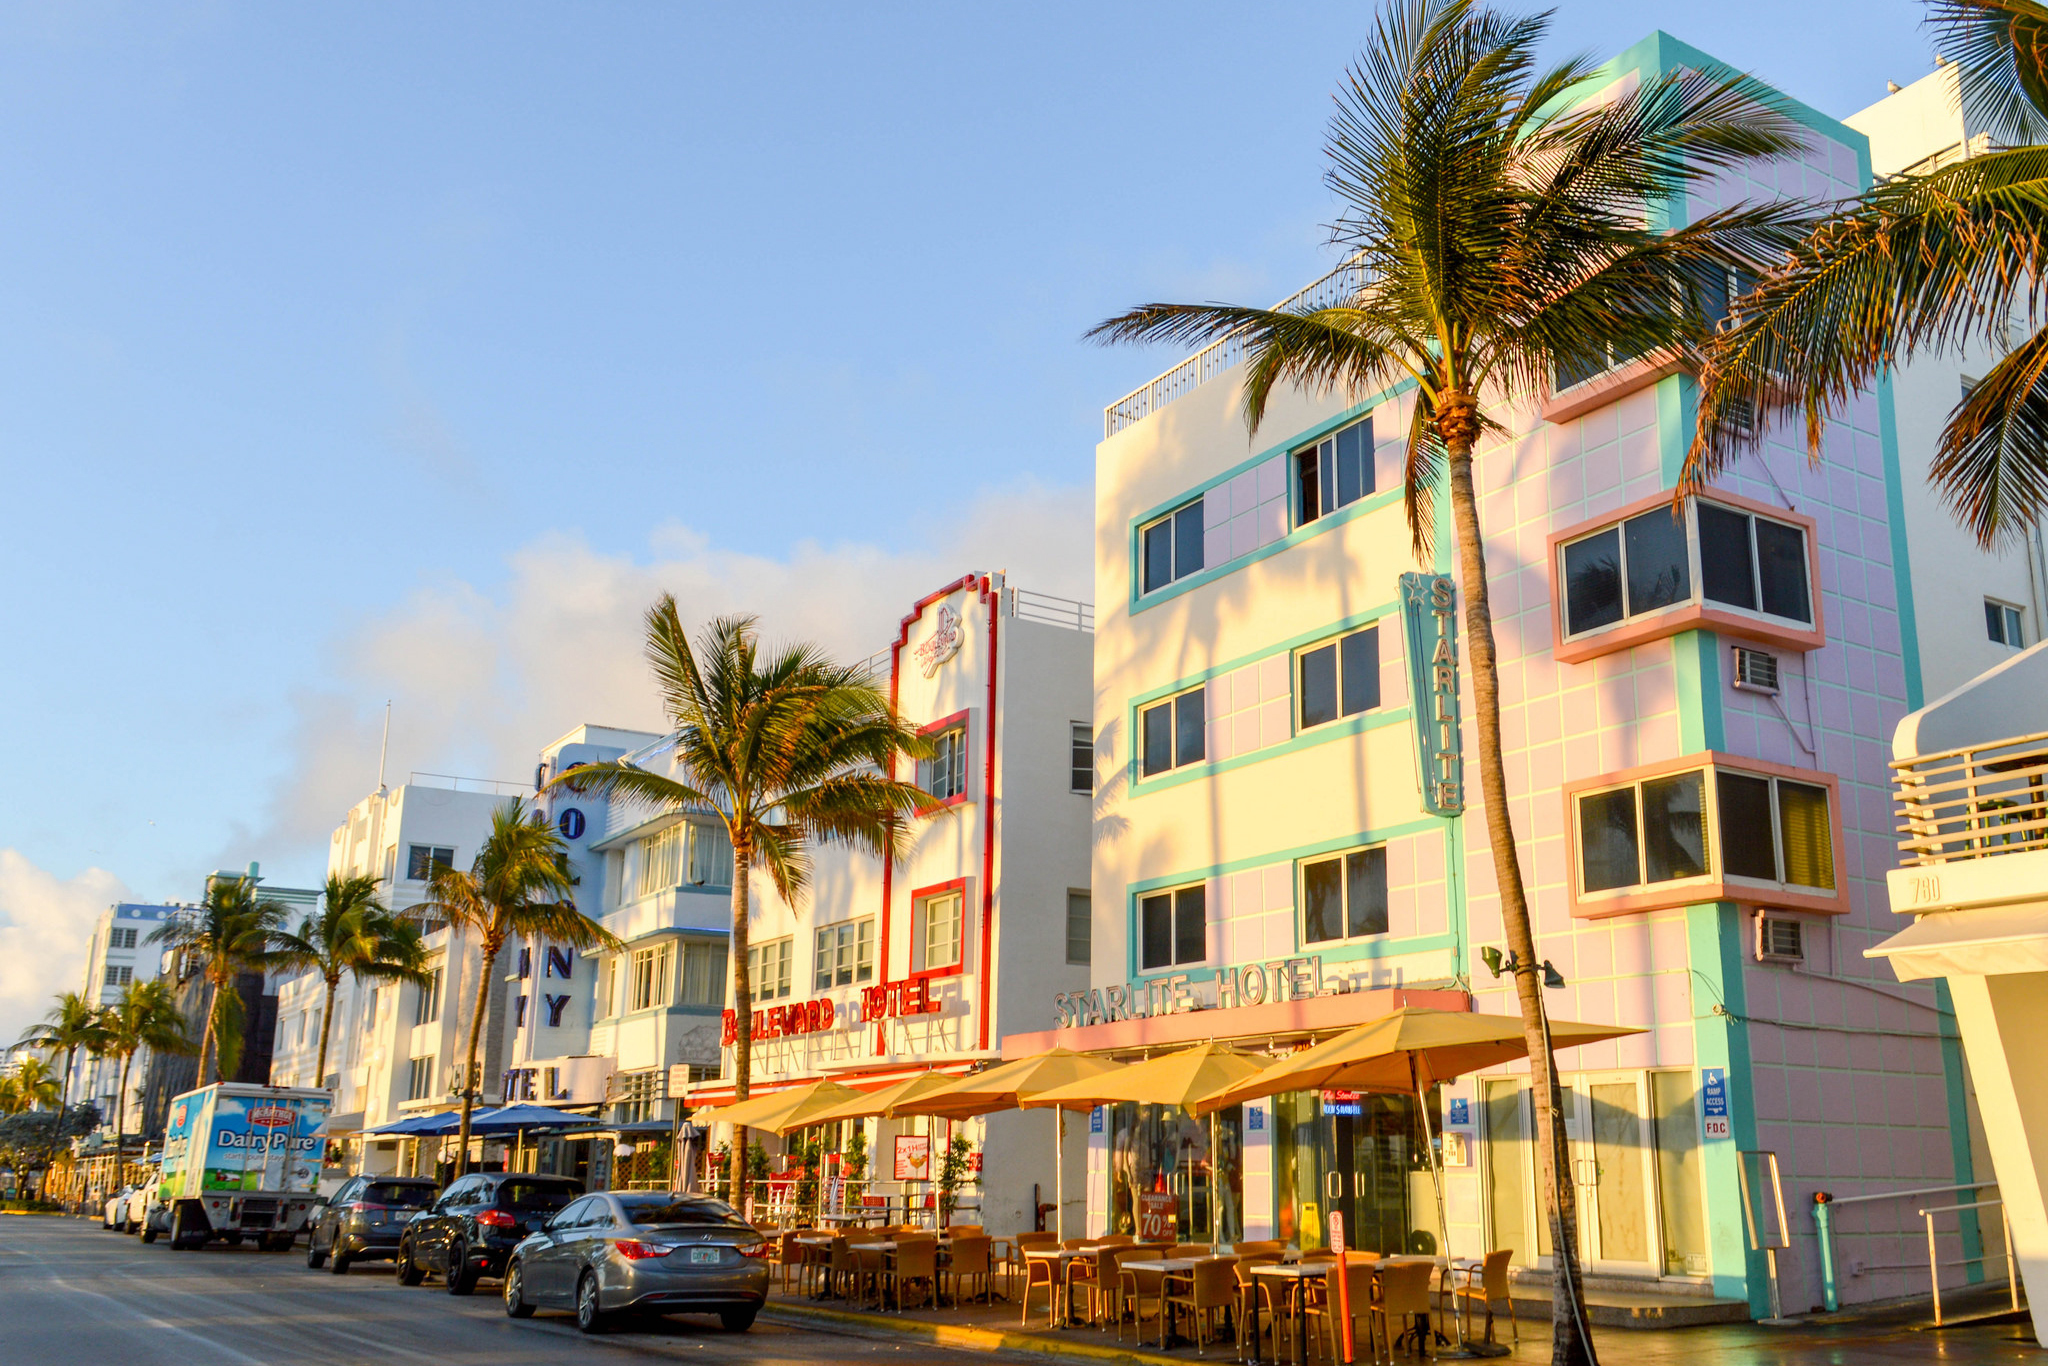 Miami Beach Parking Guide Full of Tips & Tricks from Locals